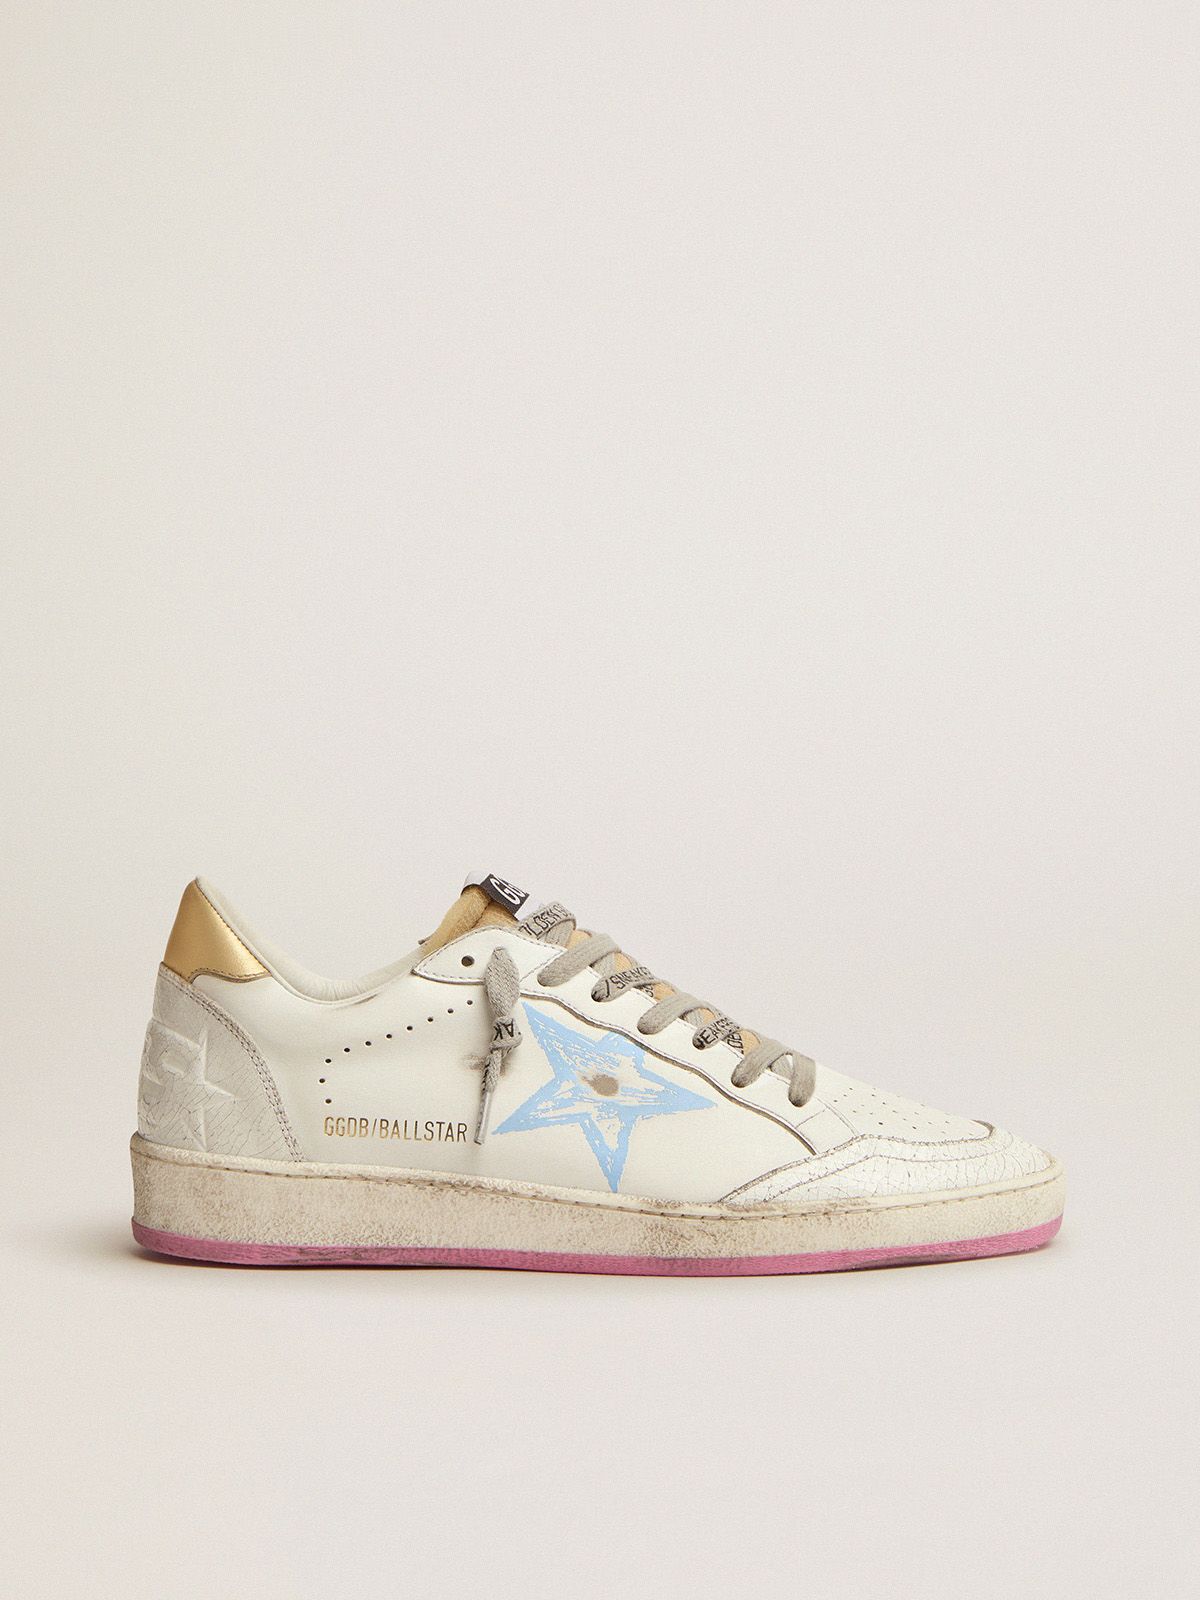 Ball Star sneakers with gold laminated leather heel tab and foam rubber tongue